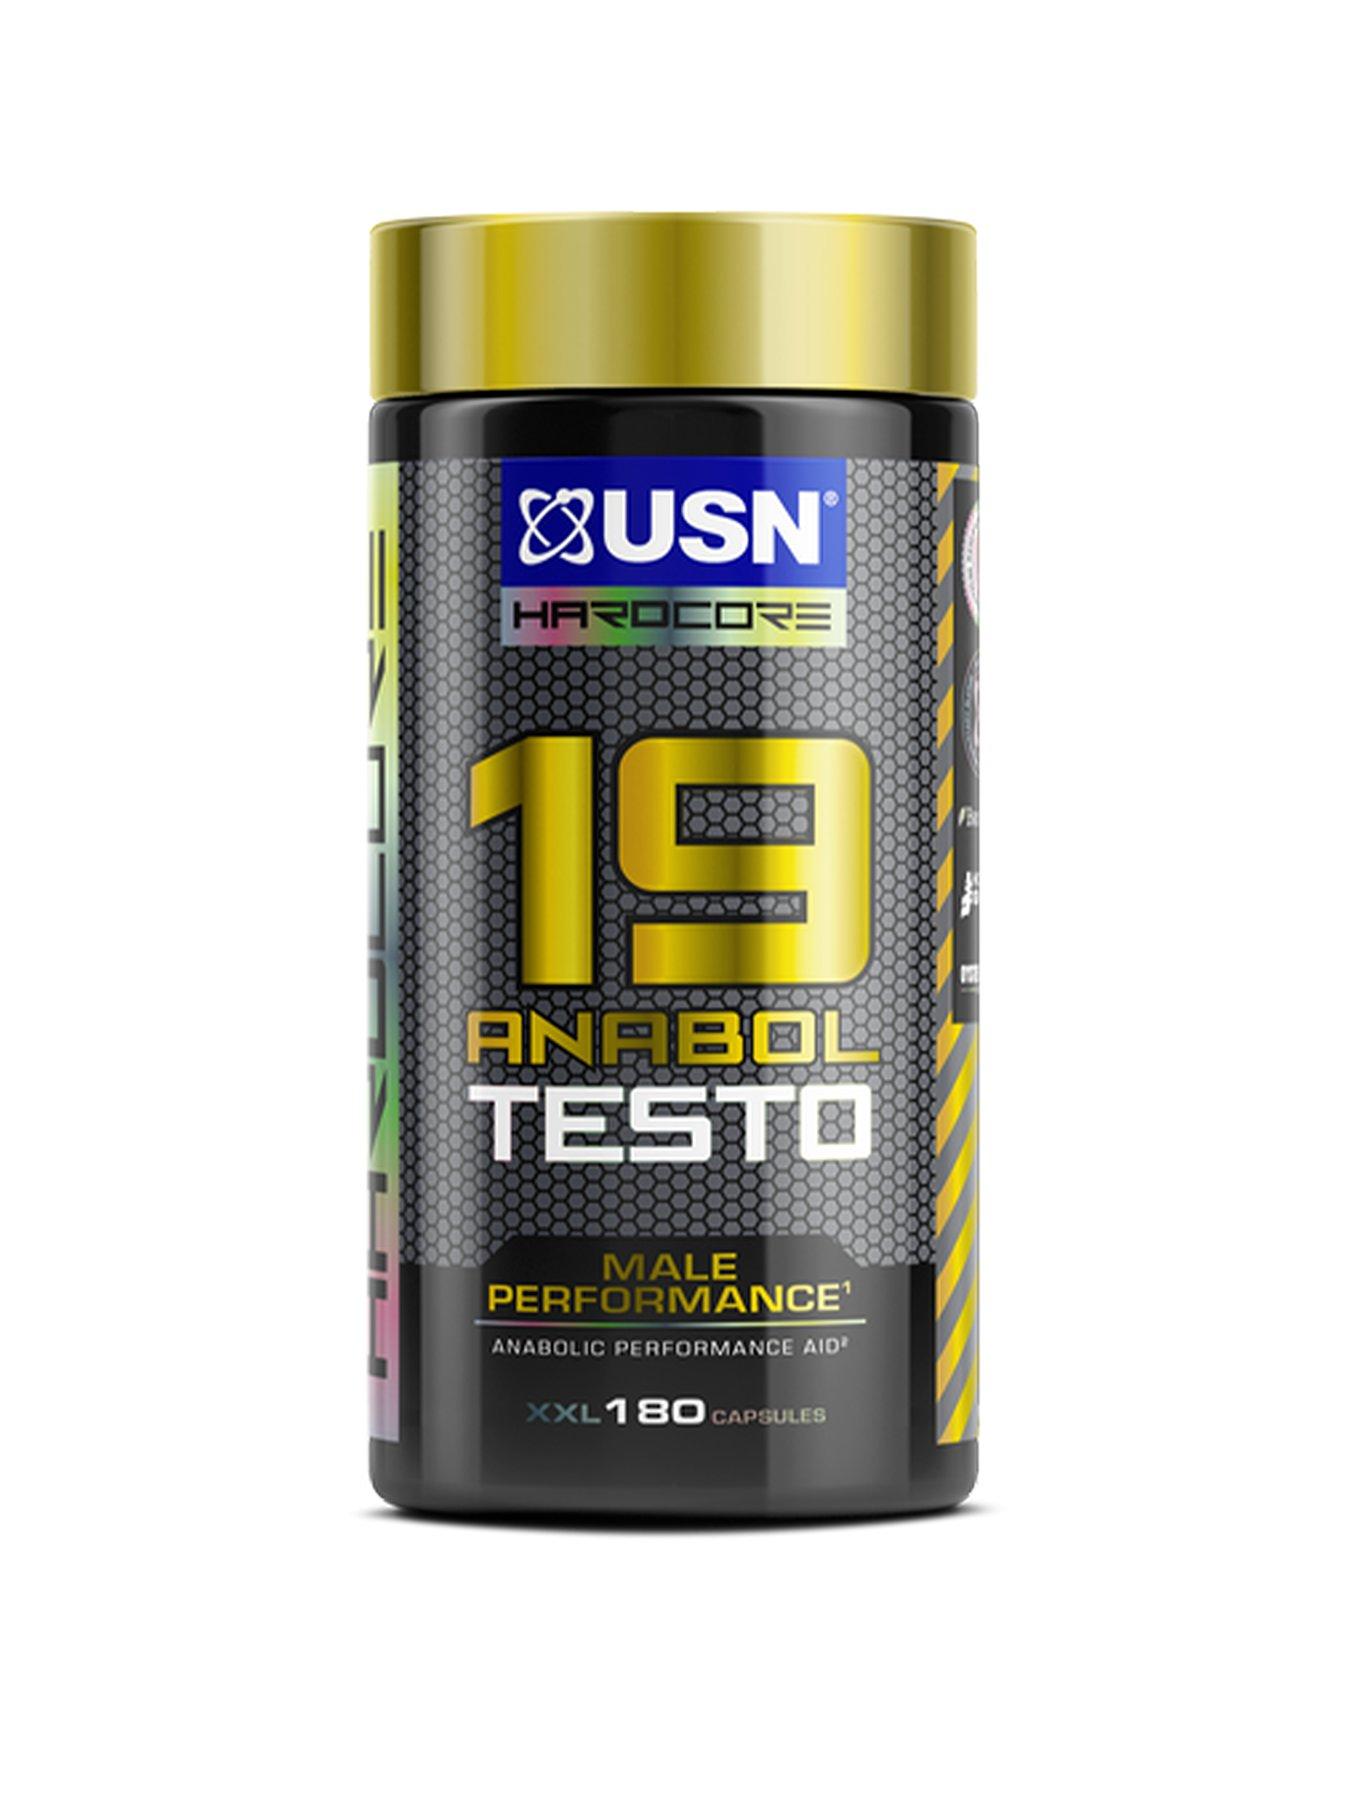 Usn muscle fuel anabolic 4kg price